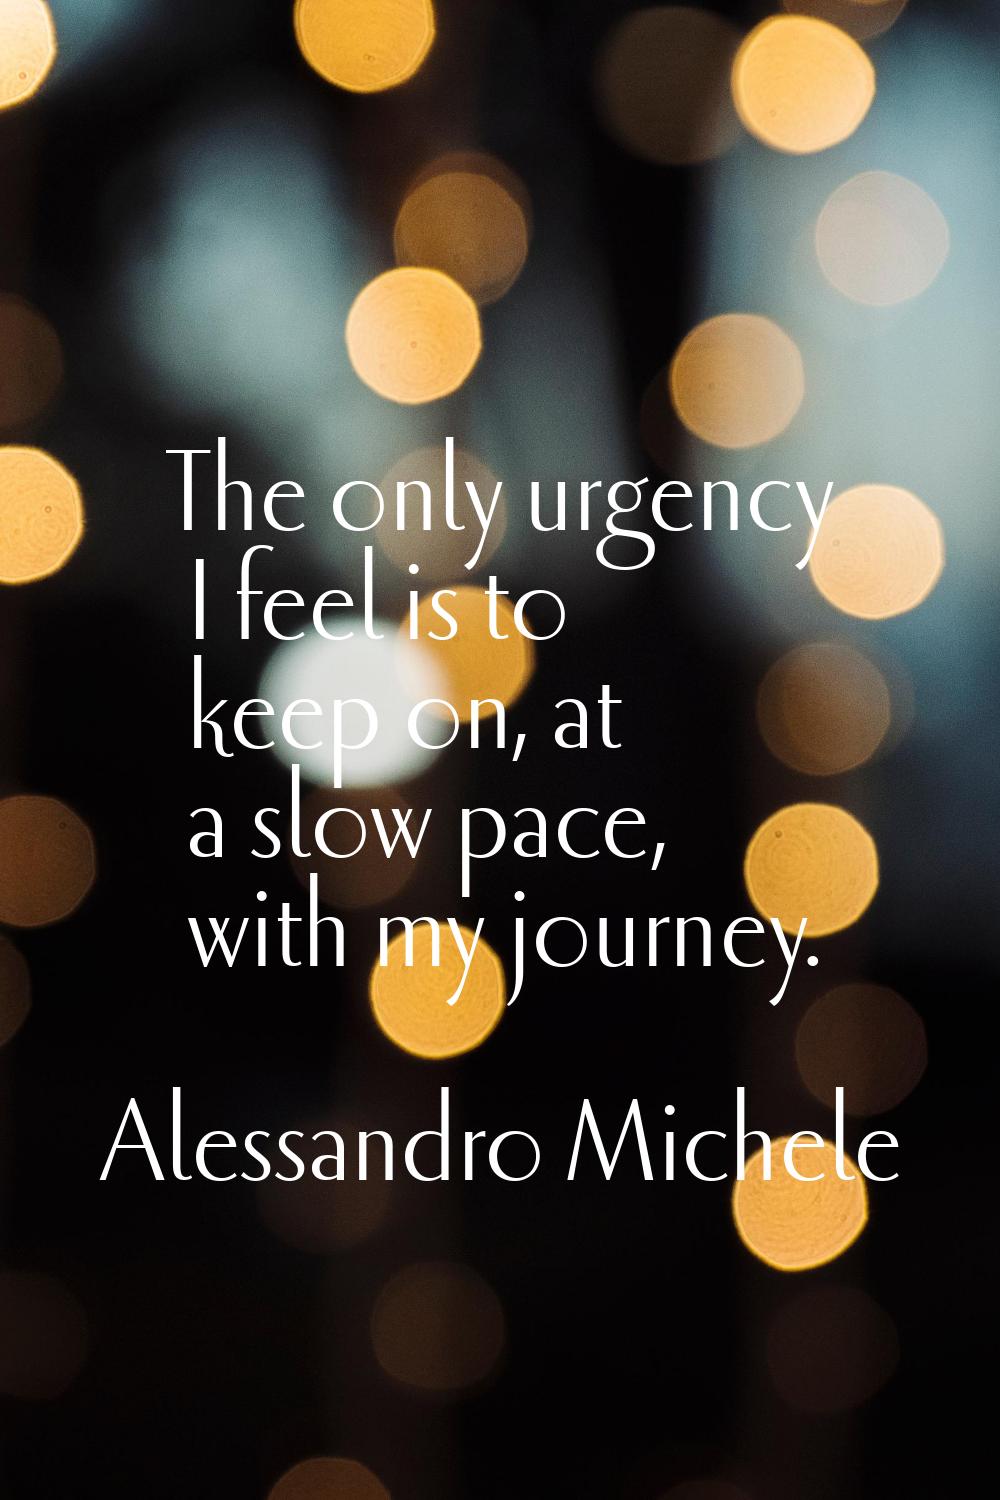 The only urgency I feel is to keep on, at a slow pace, with my journey.